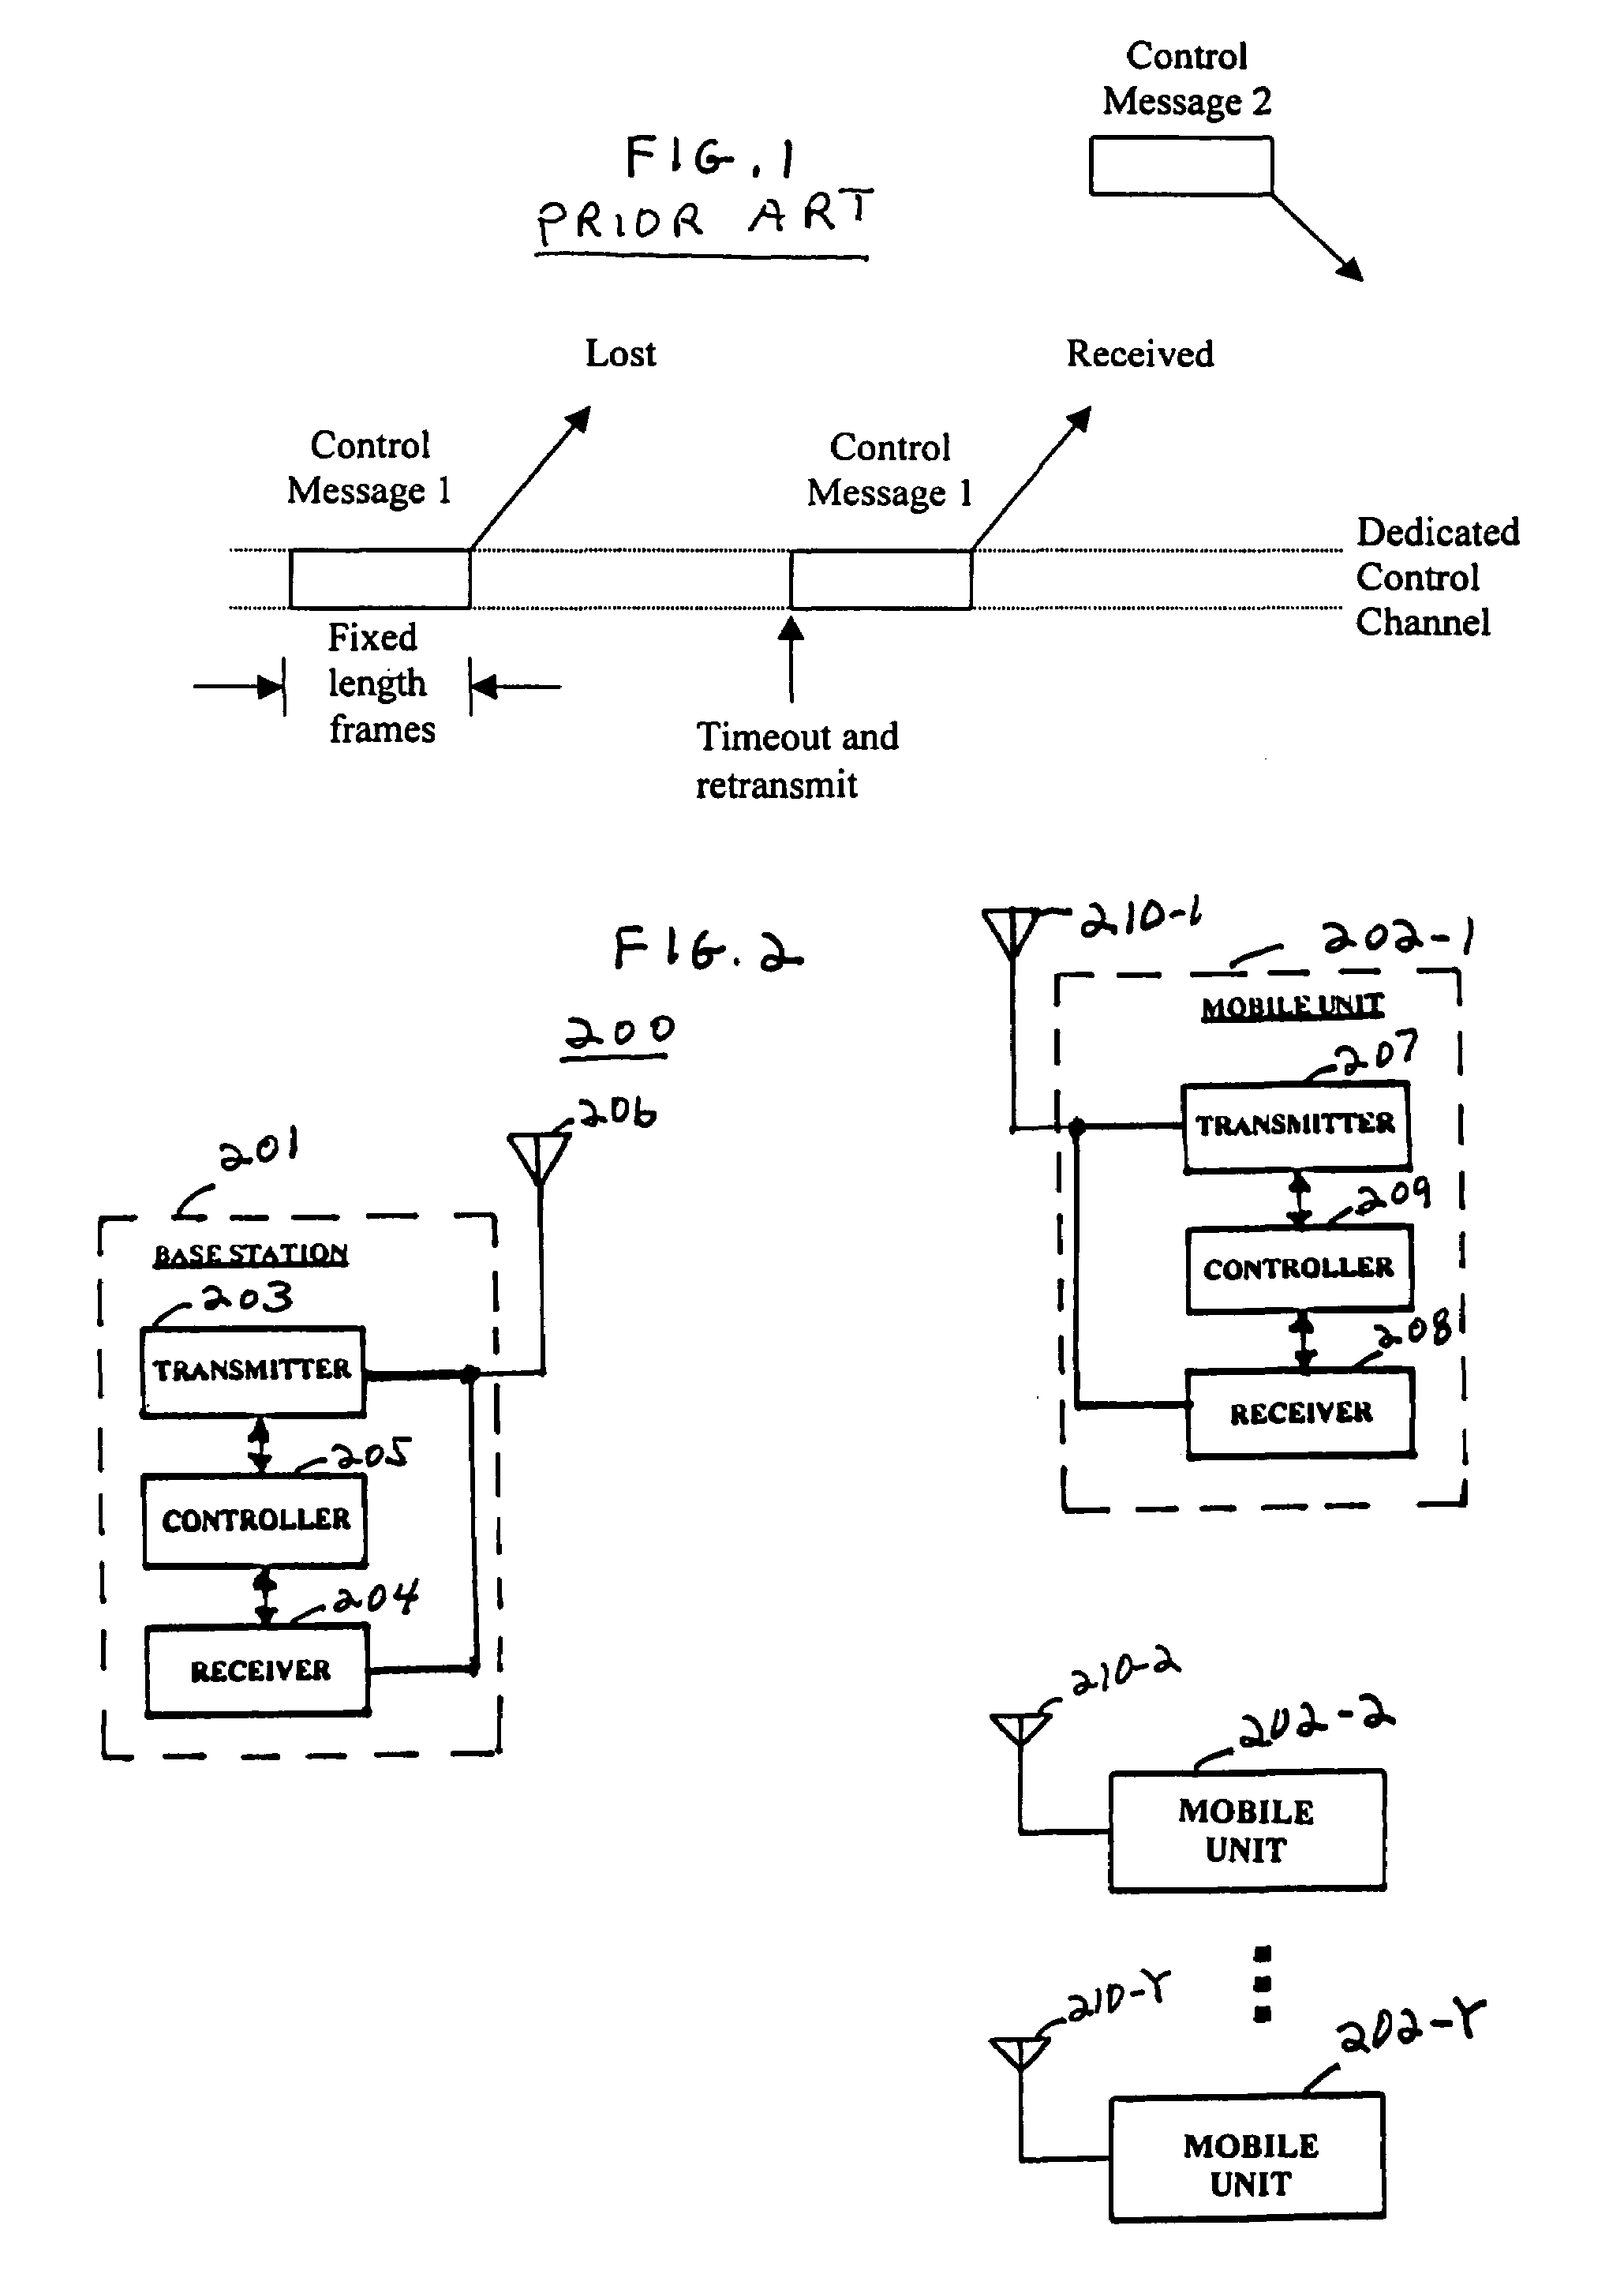 Apparatus and method for acquiring an uplink traffic channel, in wireless communications systems